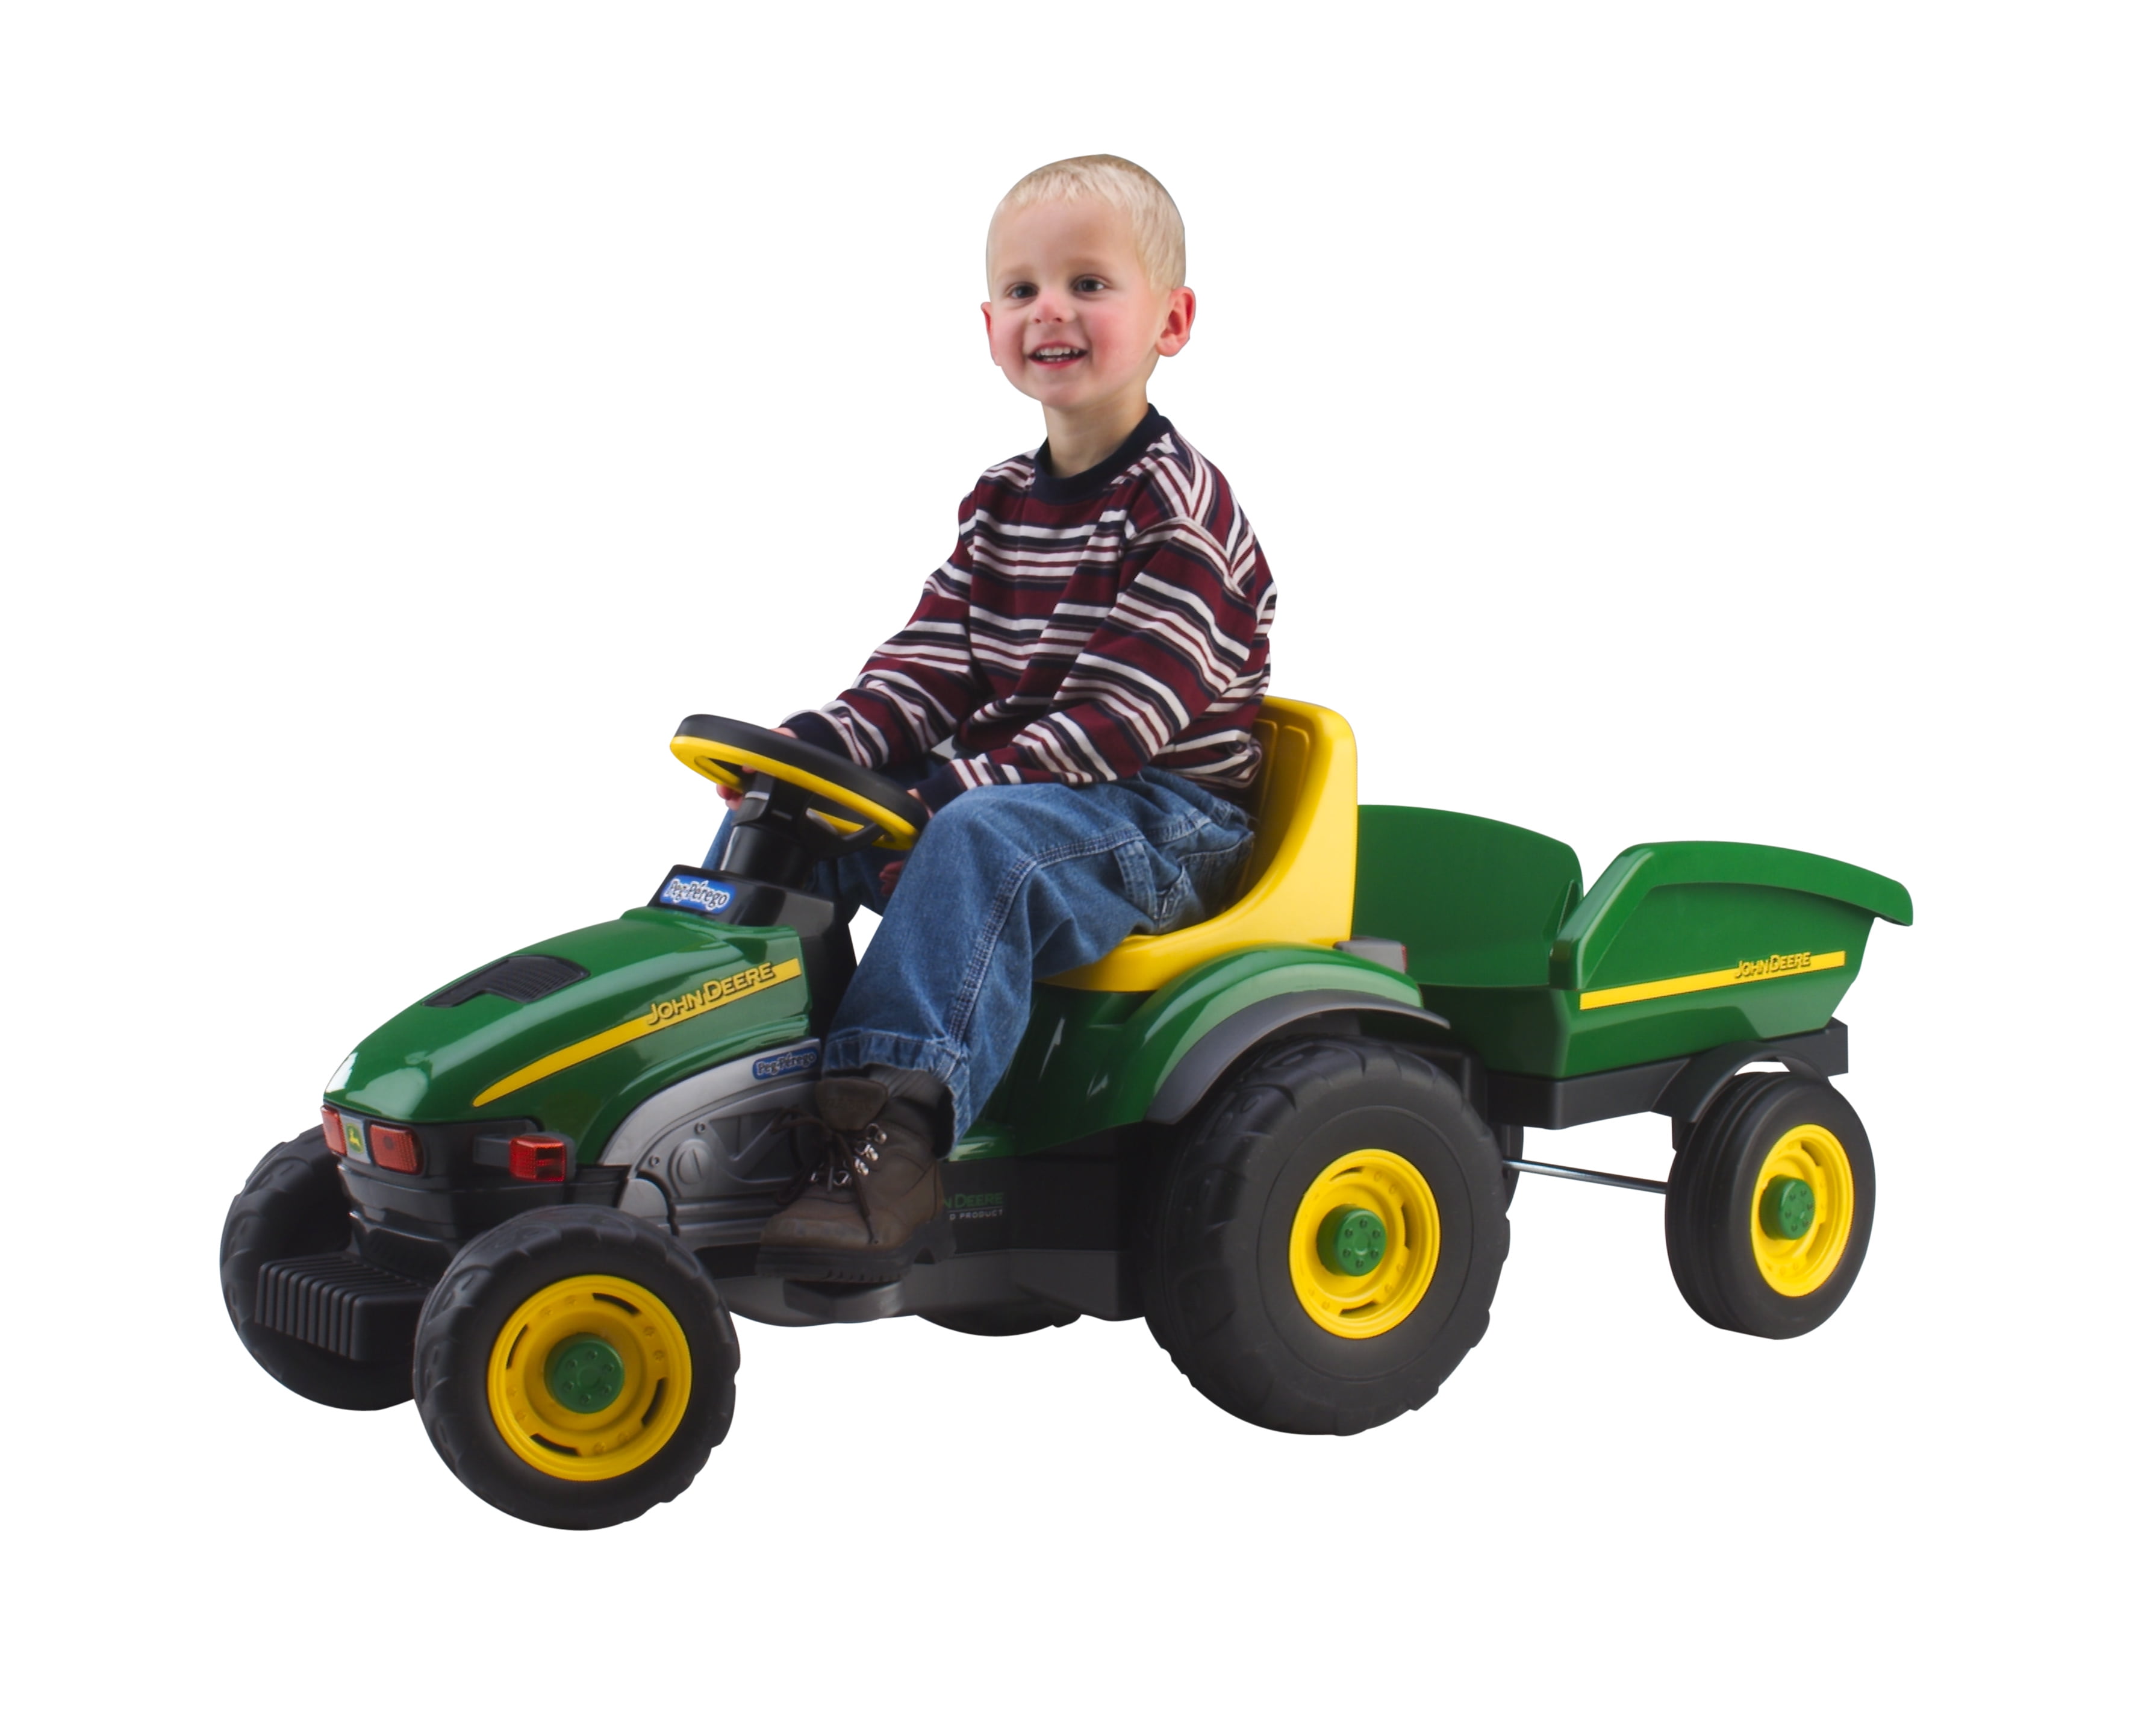 Childrens Pedal Tractor With Trailer Kids Ride On Farm Toy Age 3 